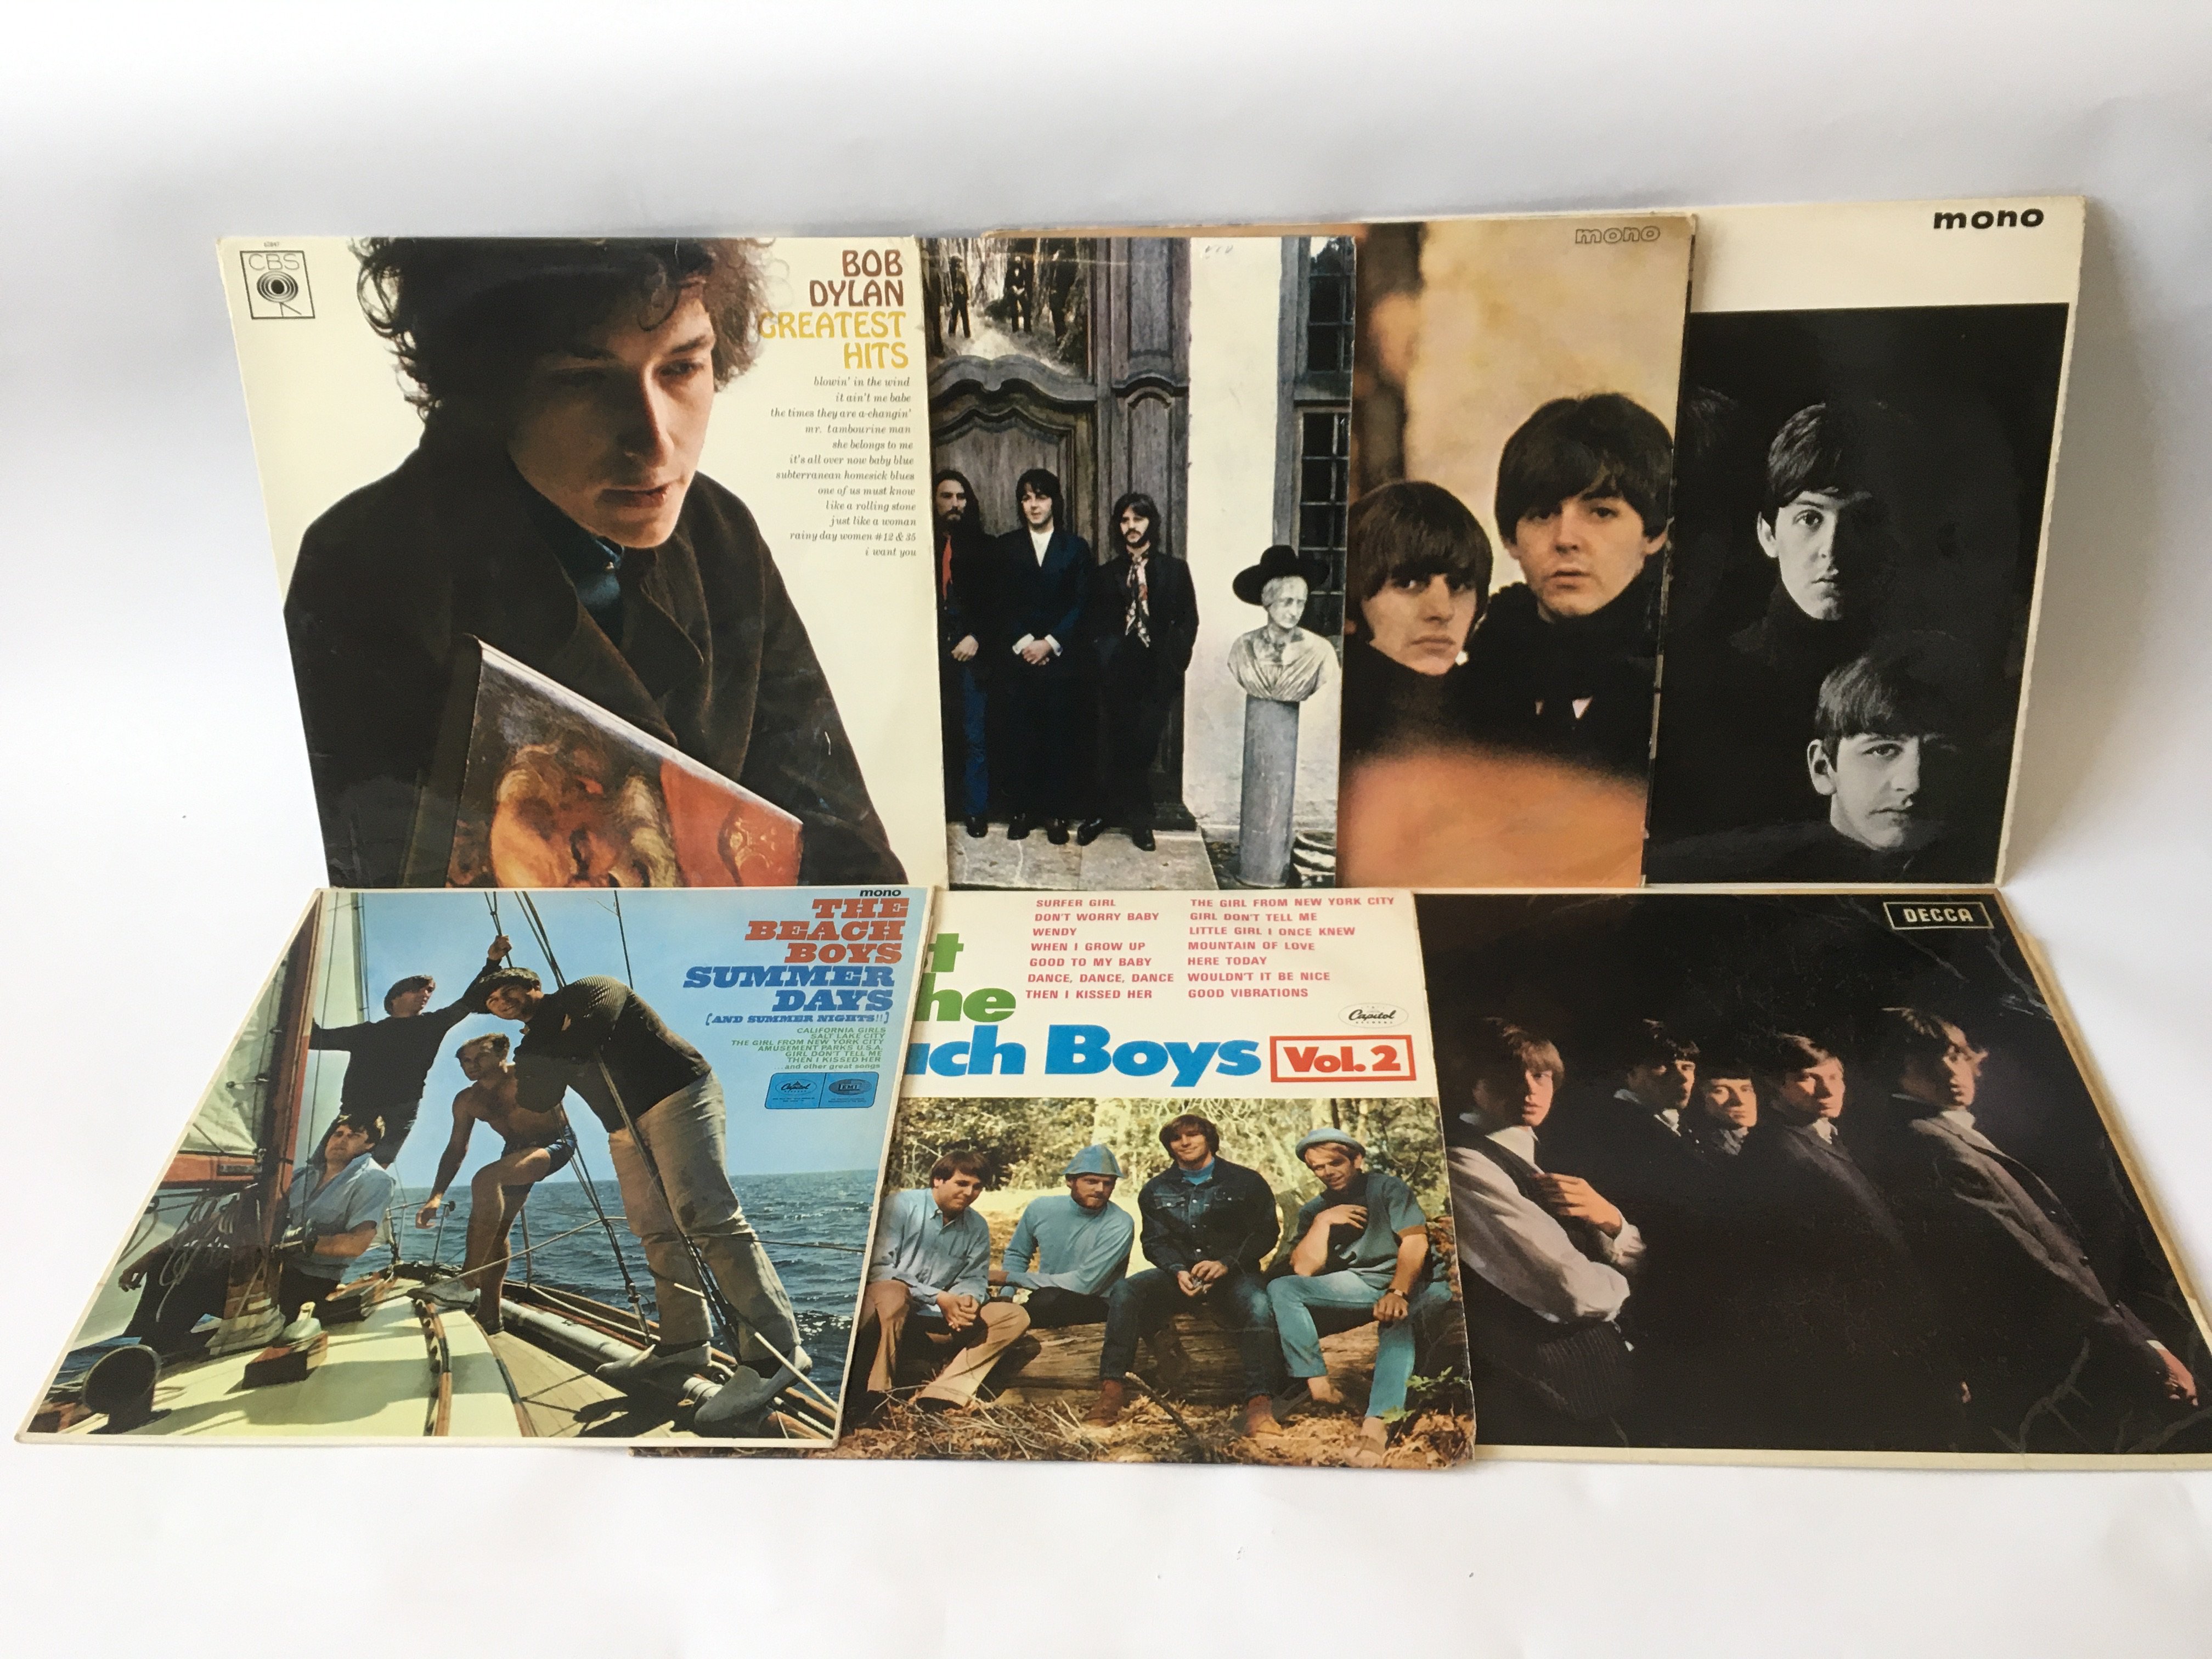 Seven LPs comprising albums by The Beatles, The Rolling Stones, The Beach Boys and Bob Dylan.